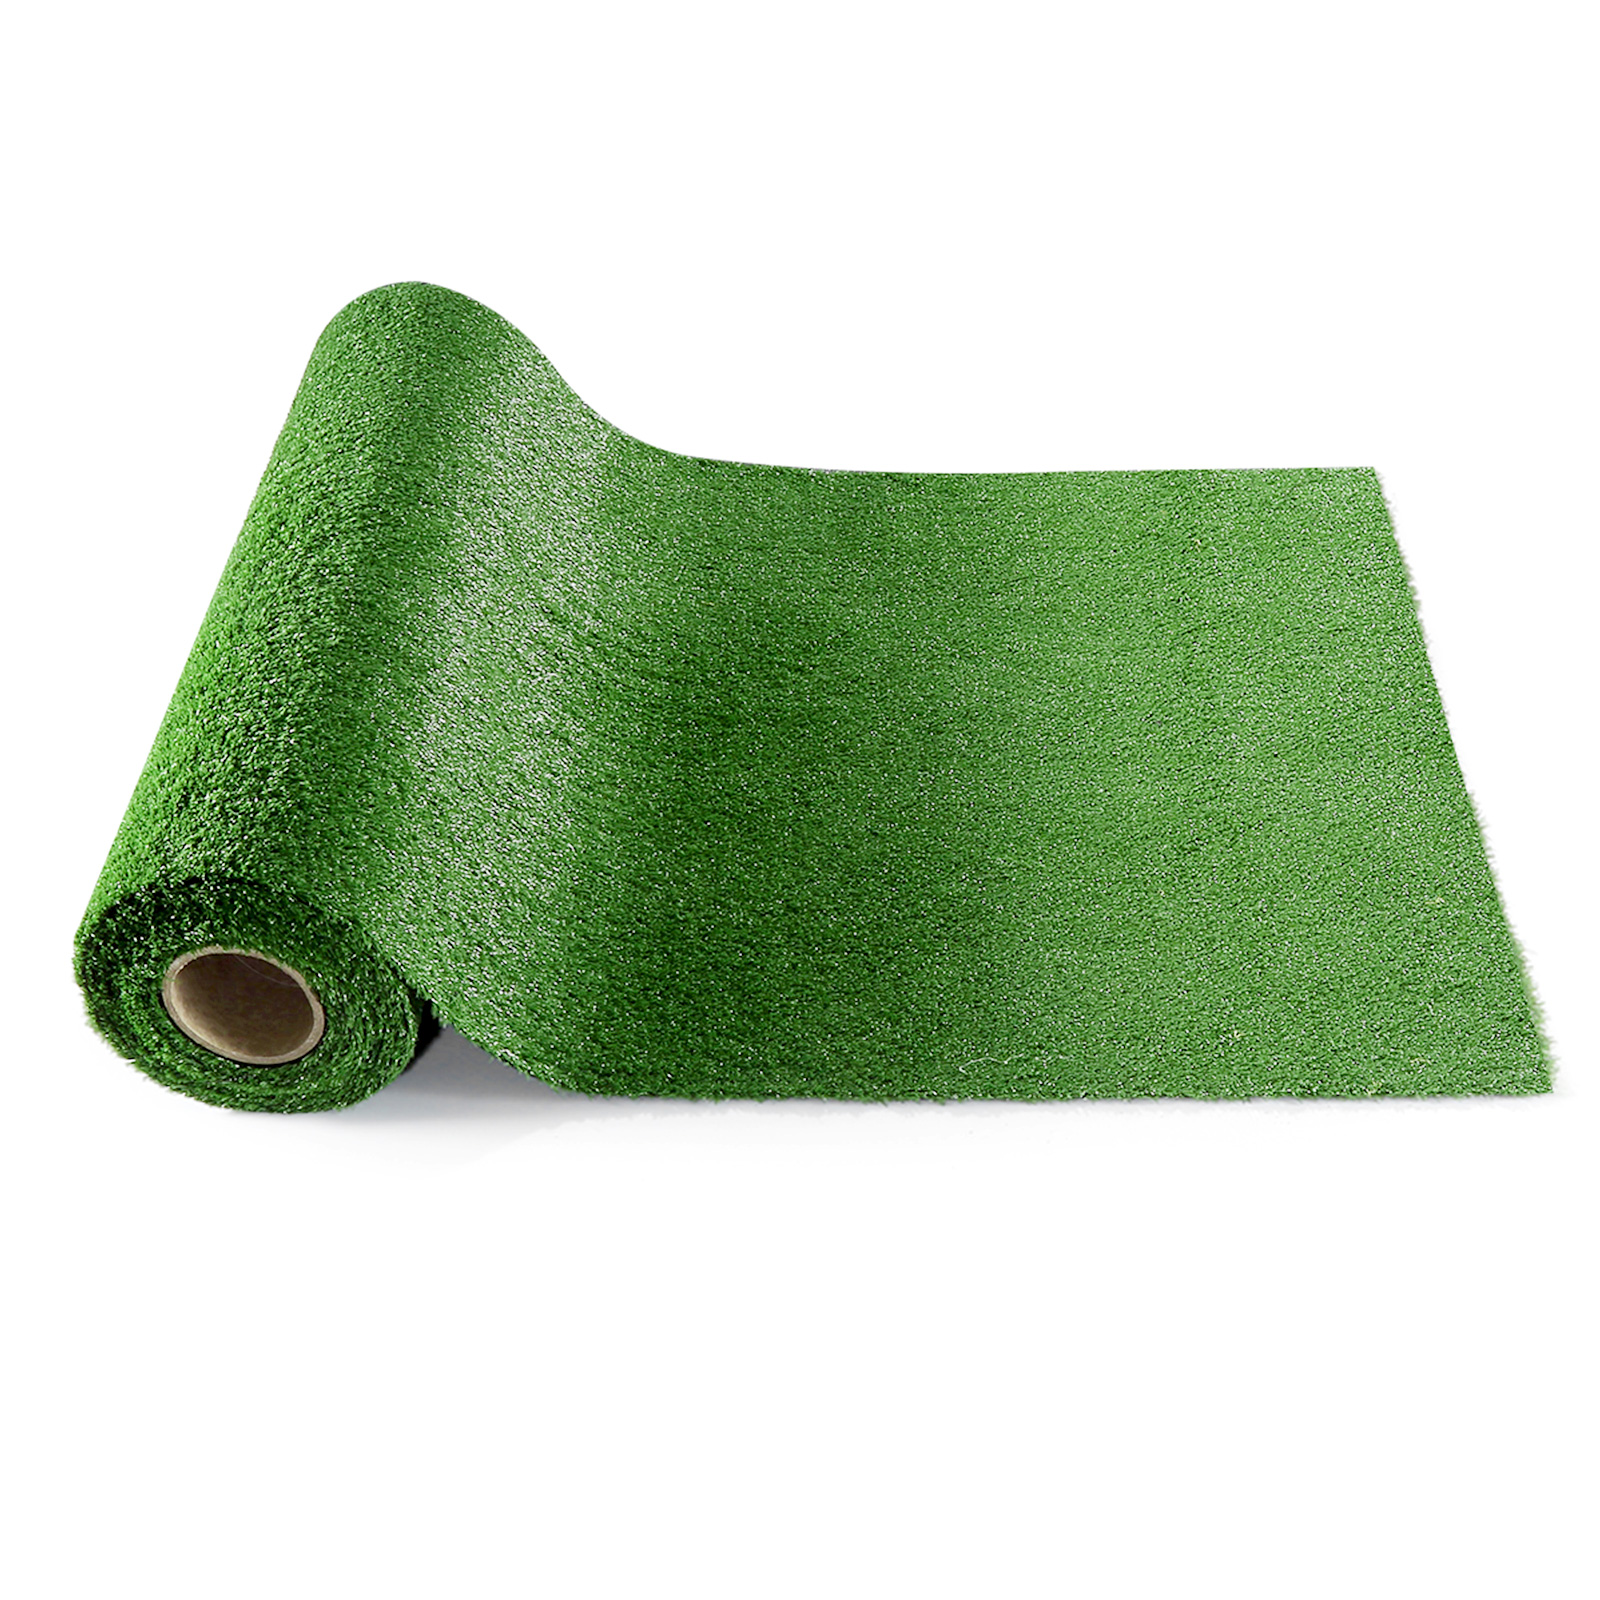 Artificial Grass Fake Lawn - Three Sizes Available